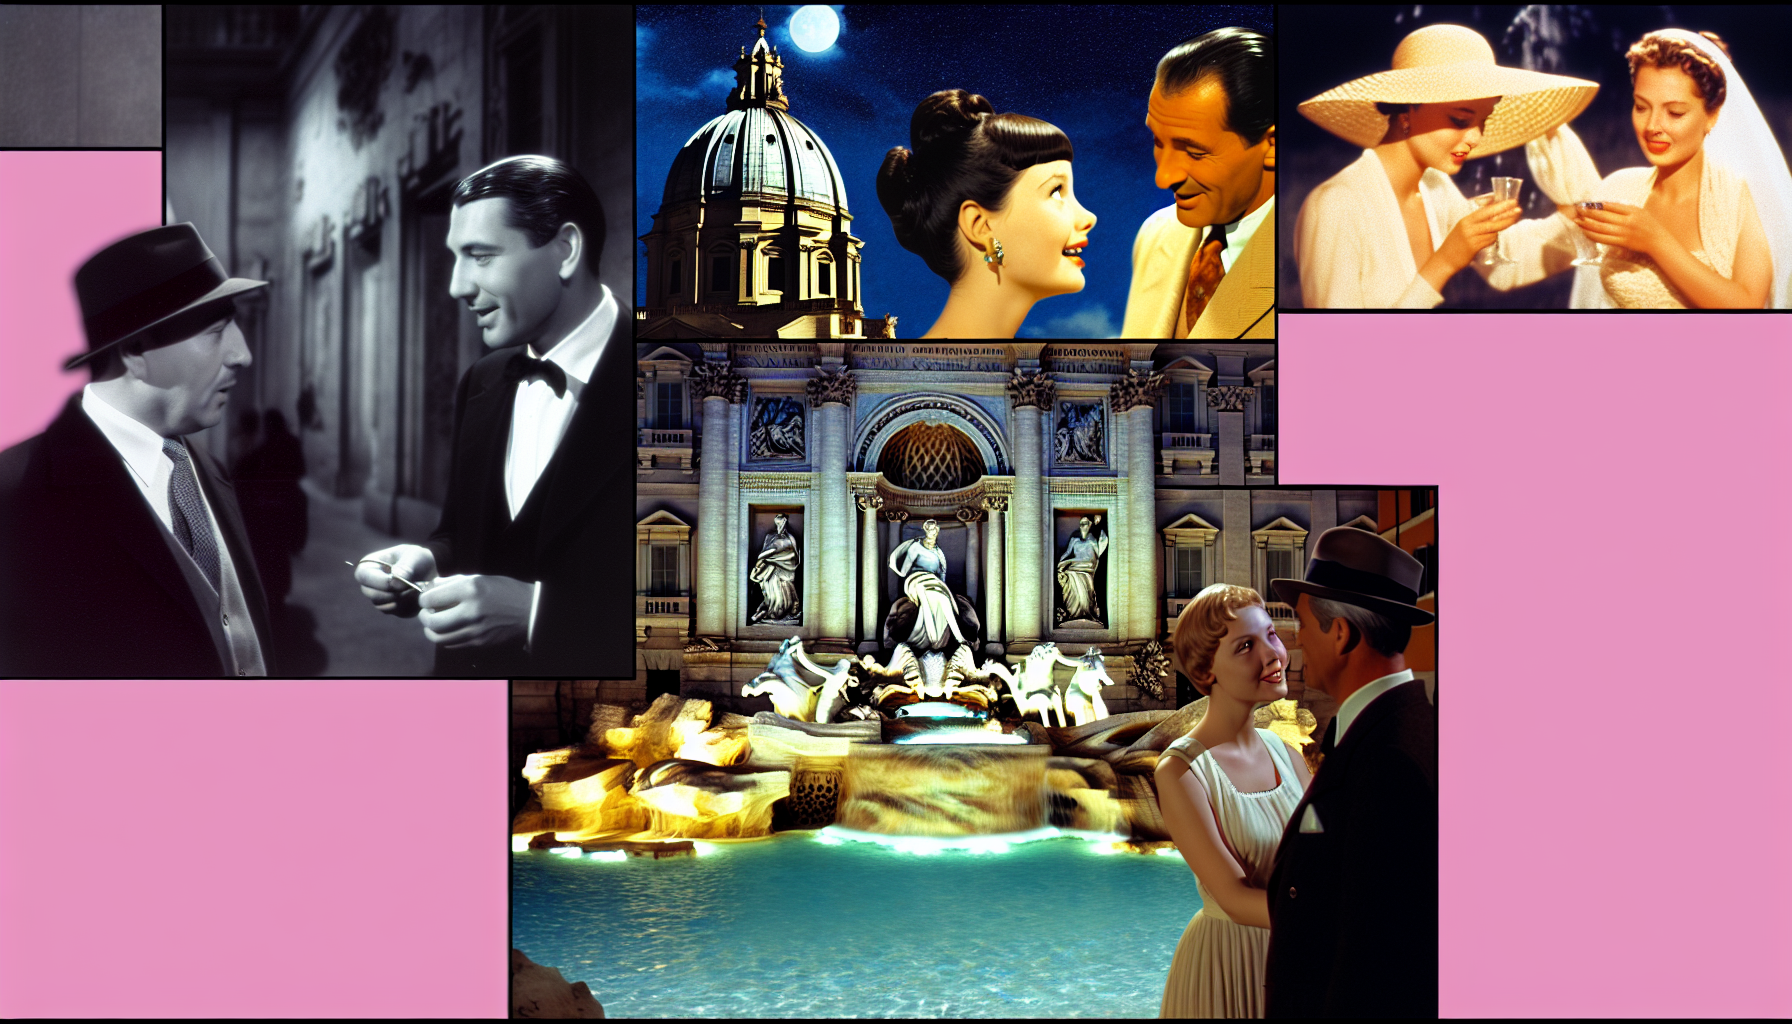 Trevi Fountain featured in famous films